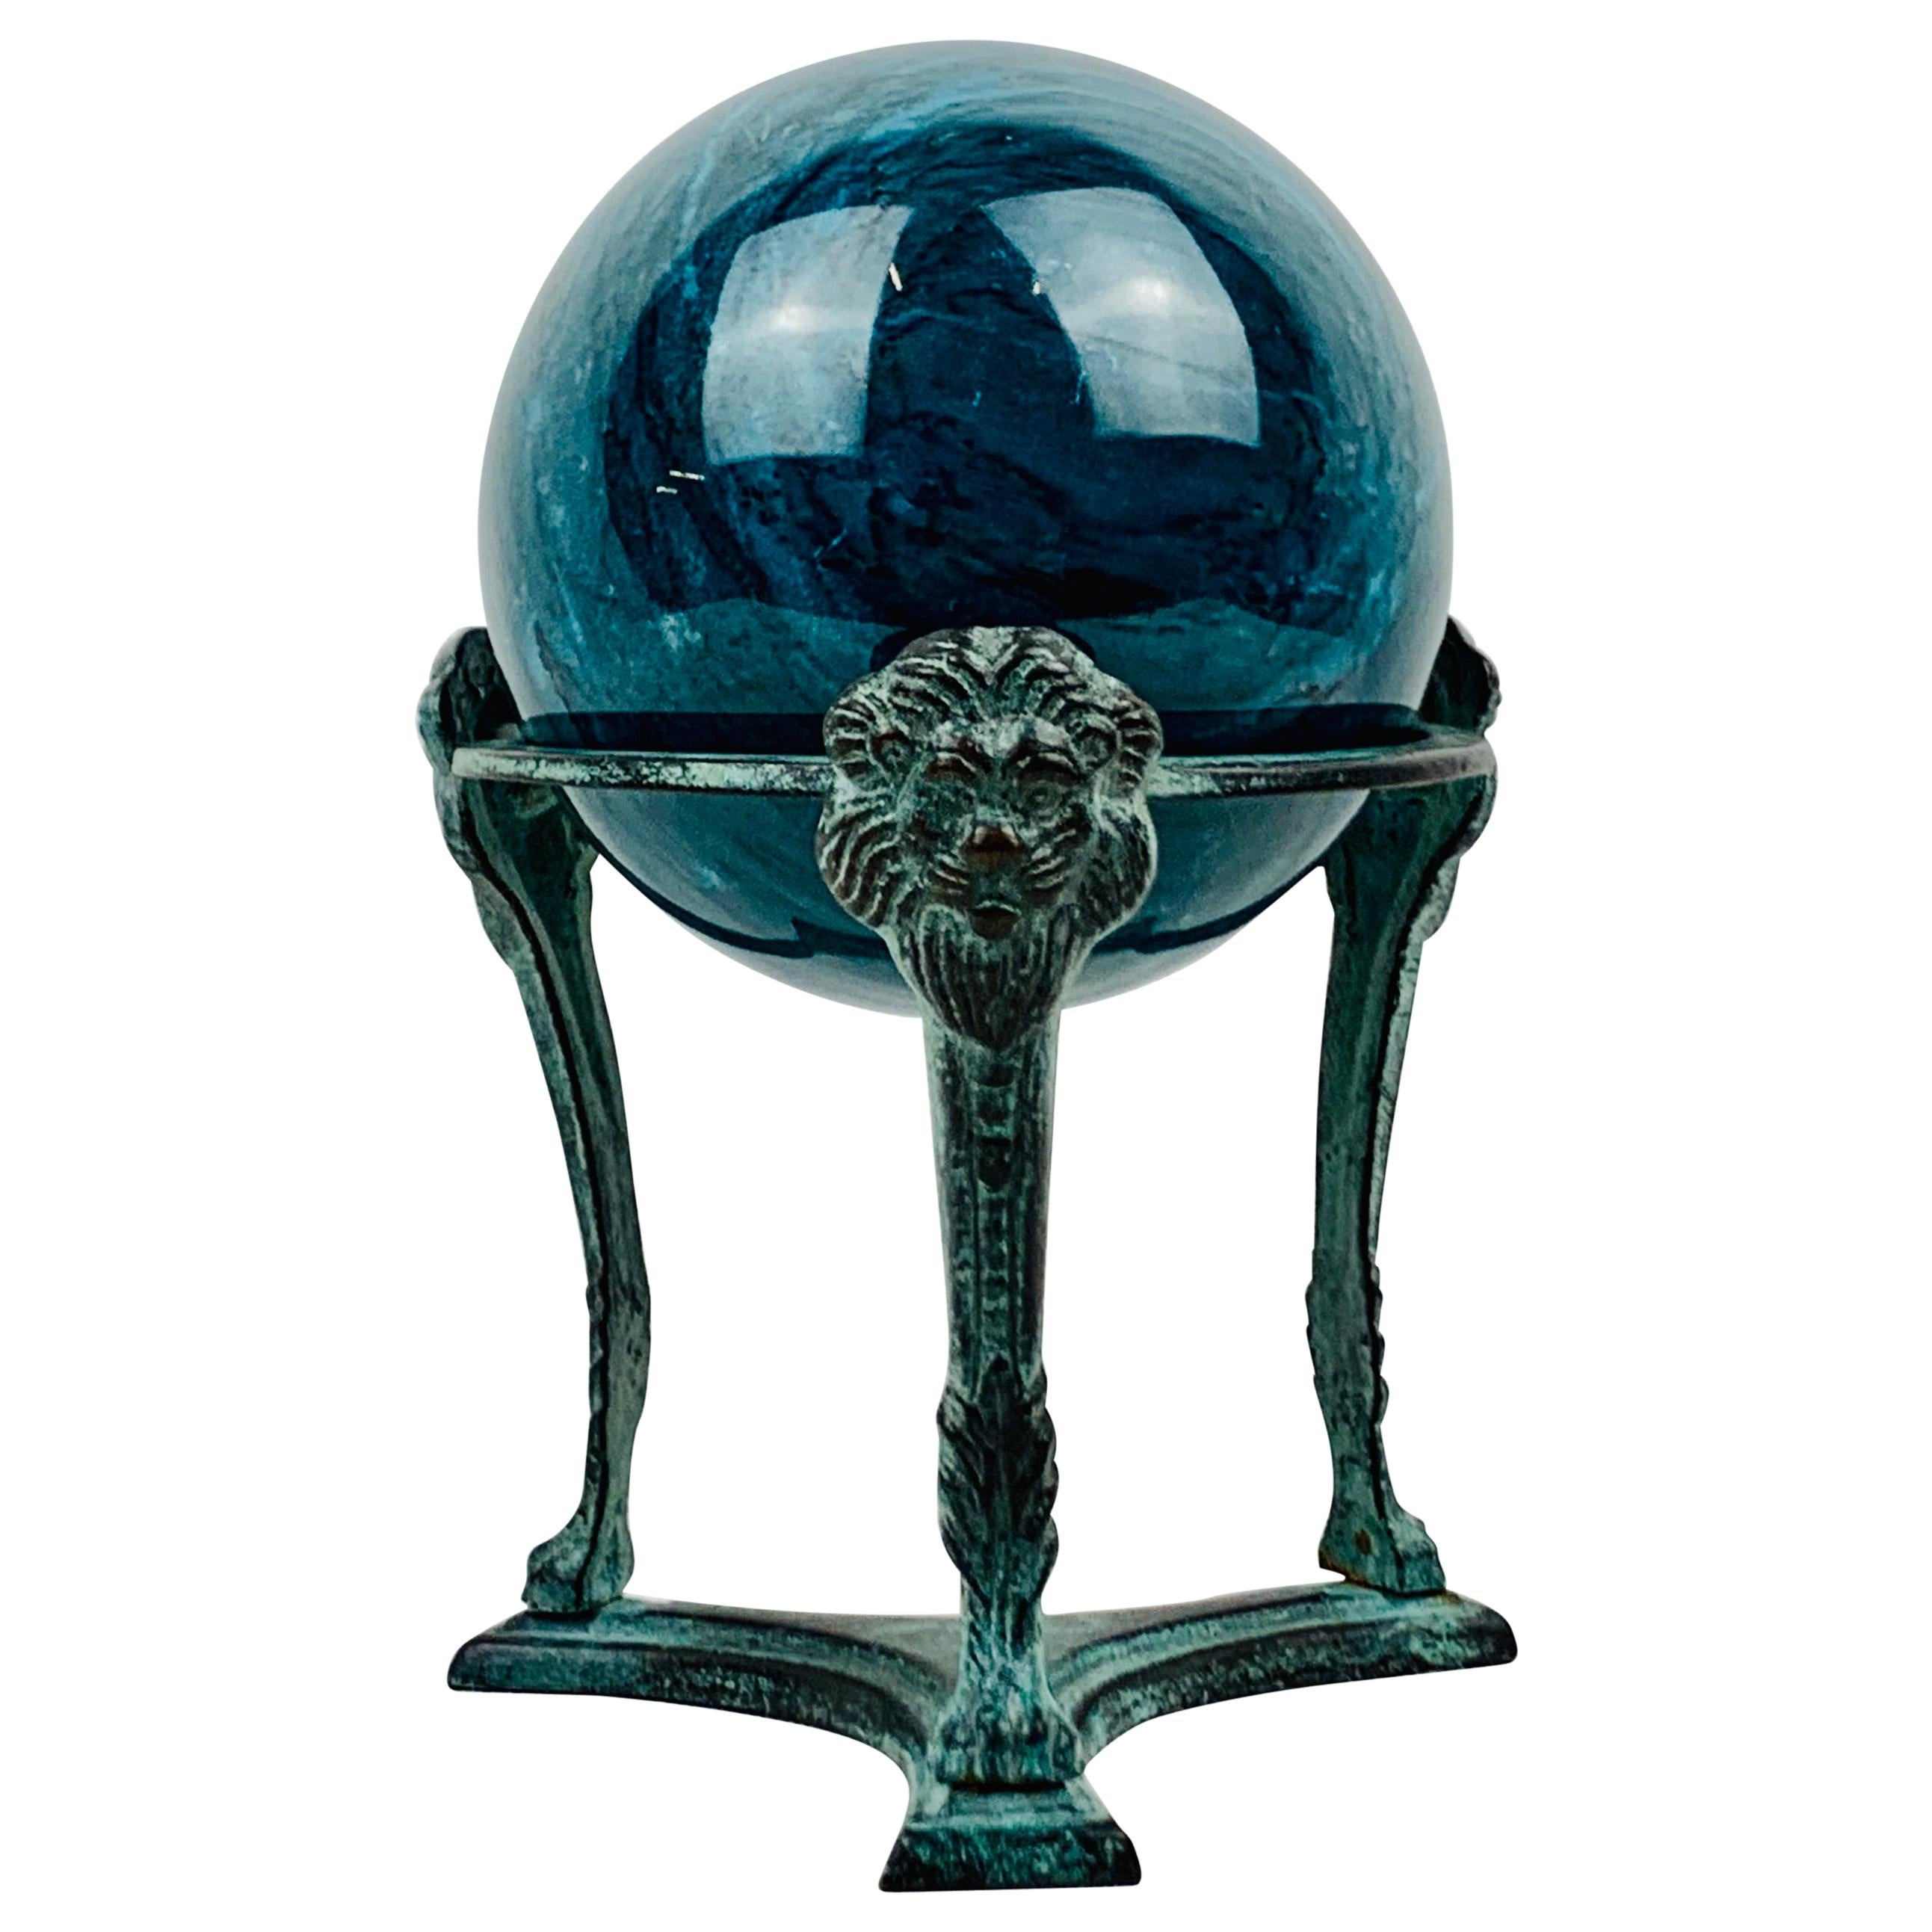 Blue Marble Orb or Sphere-Neo-Classical Patinated Tripod Stand with Lion's Faces